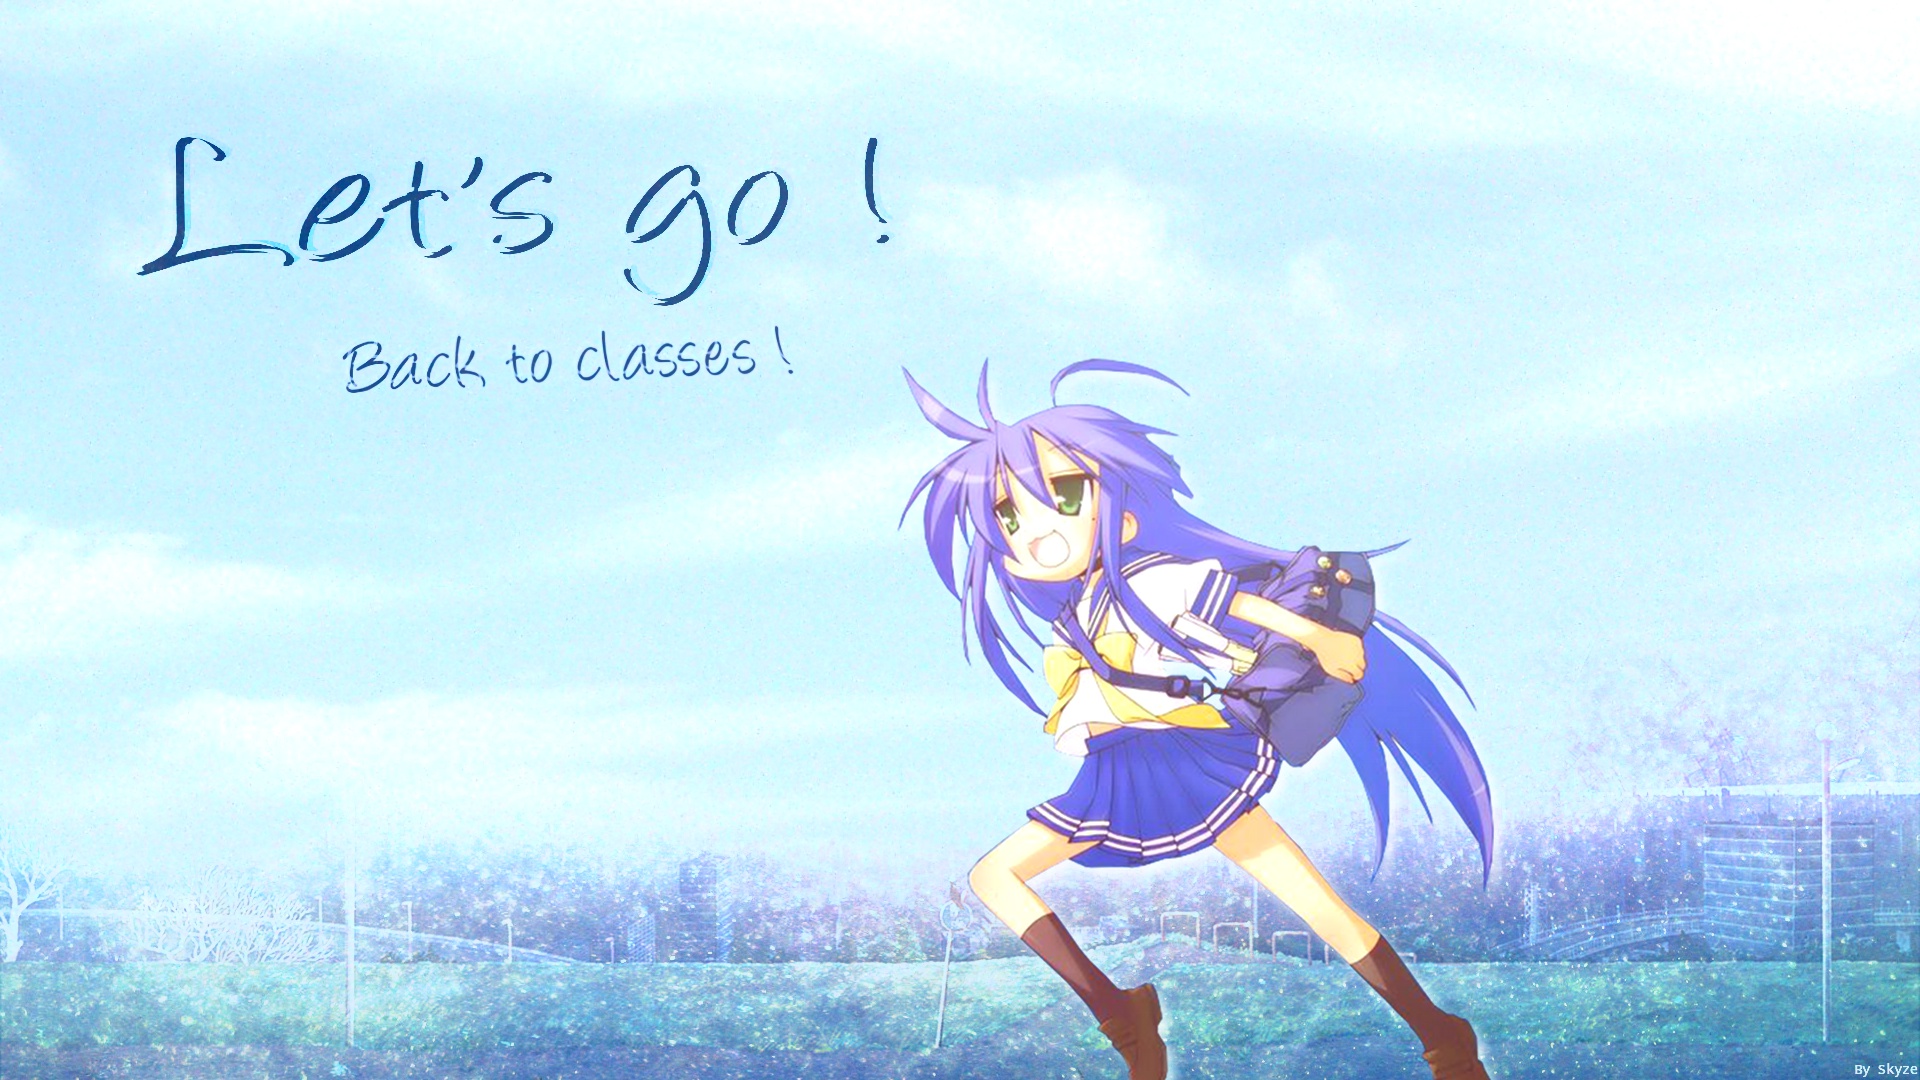 HD Wallpaper Lucky Star Konata Back To Classes By